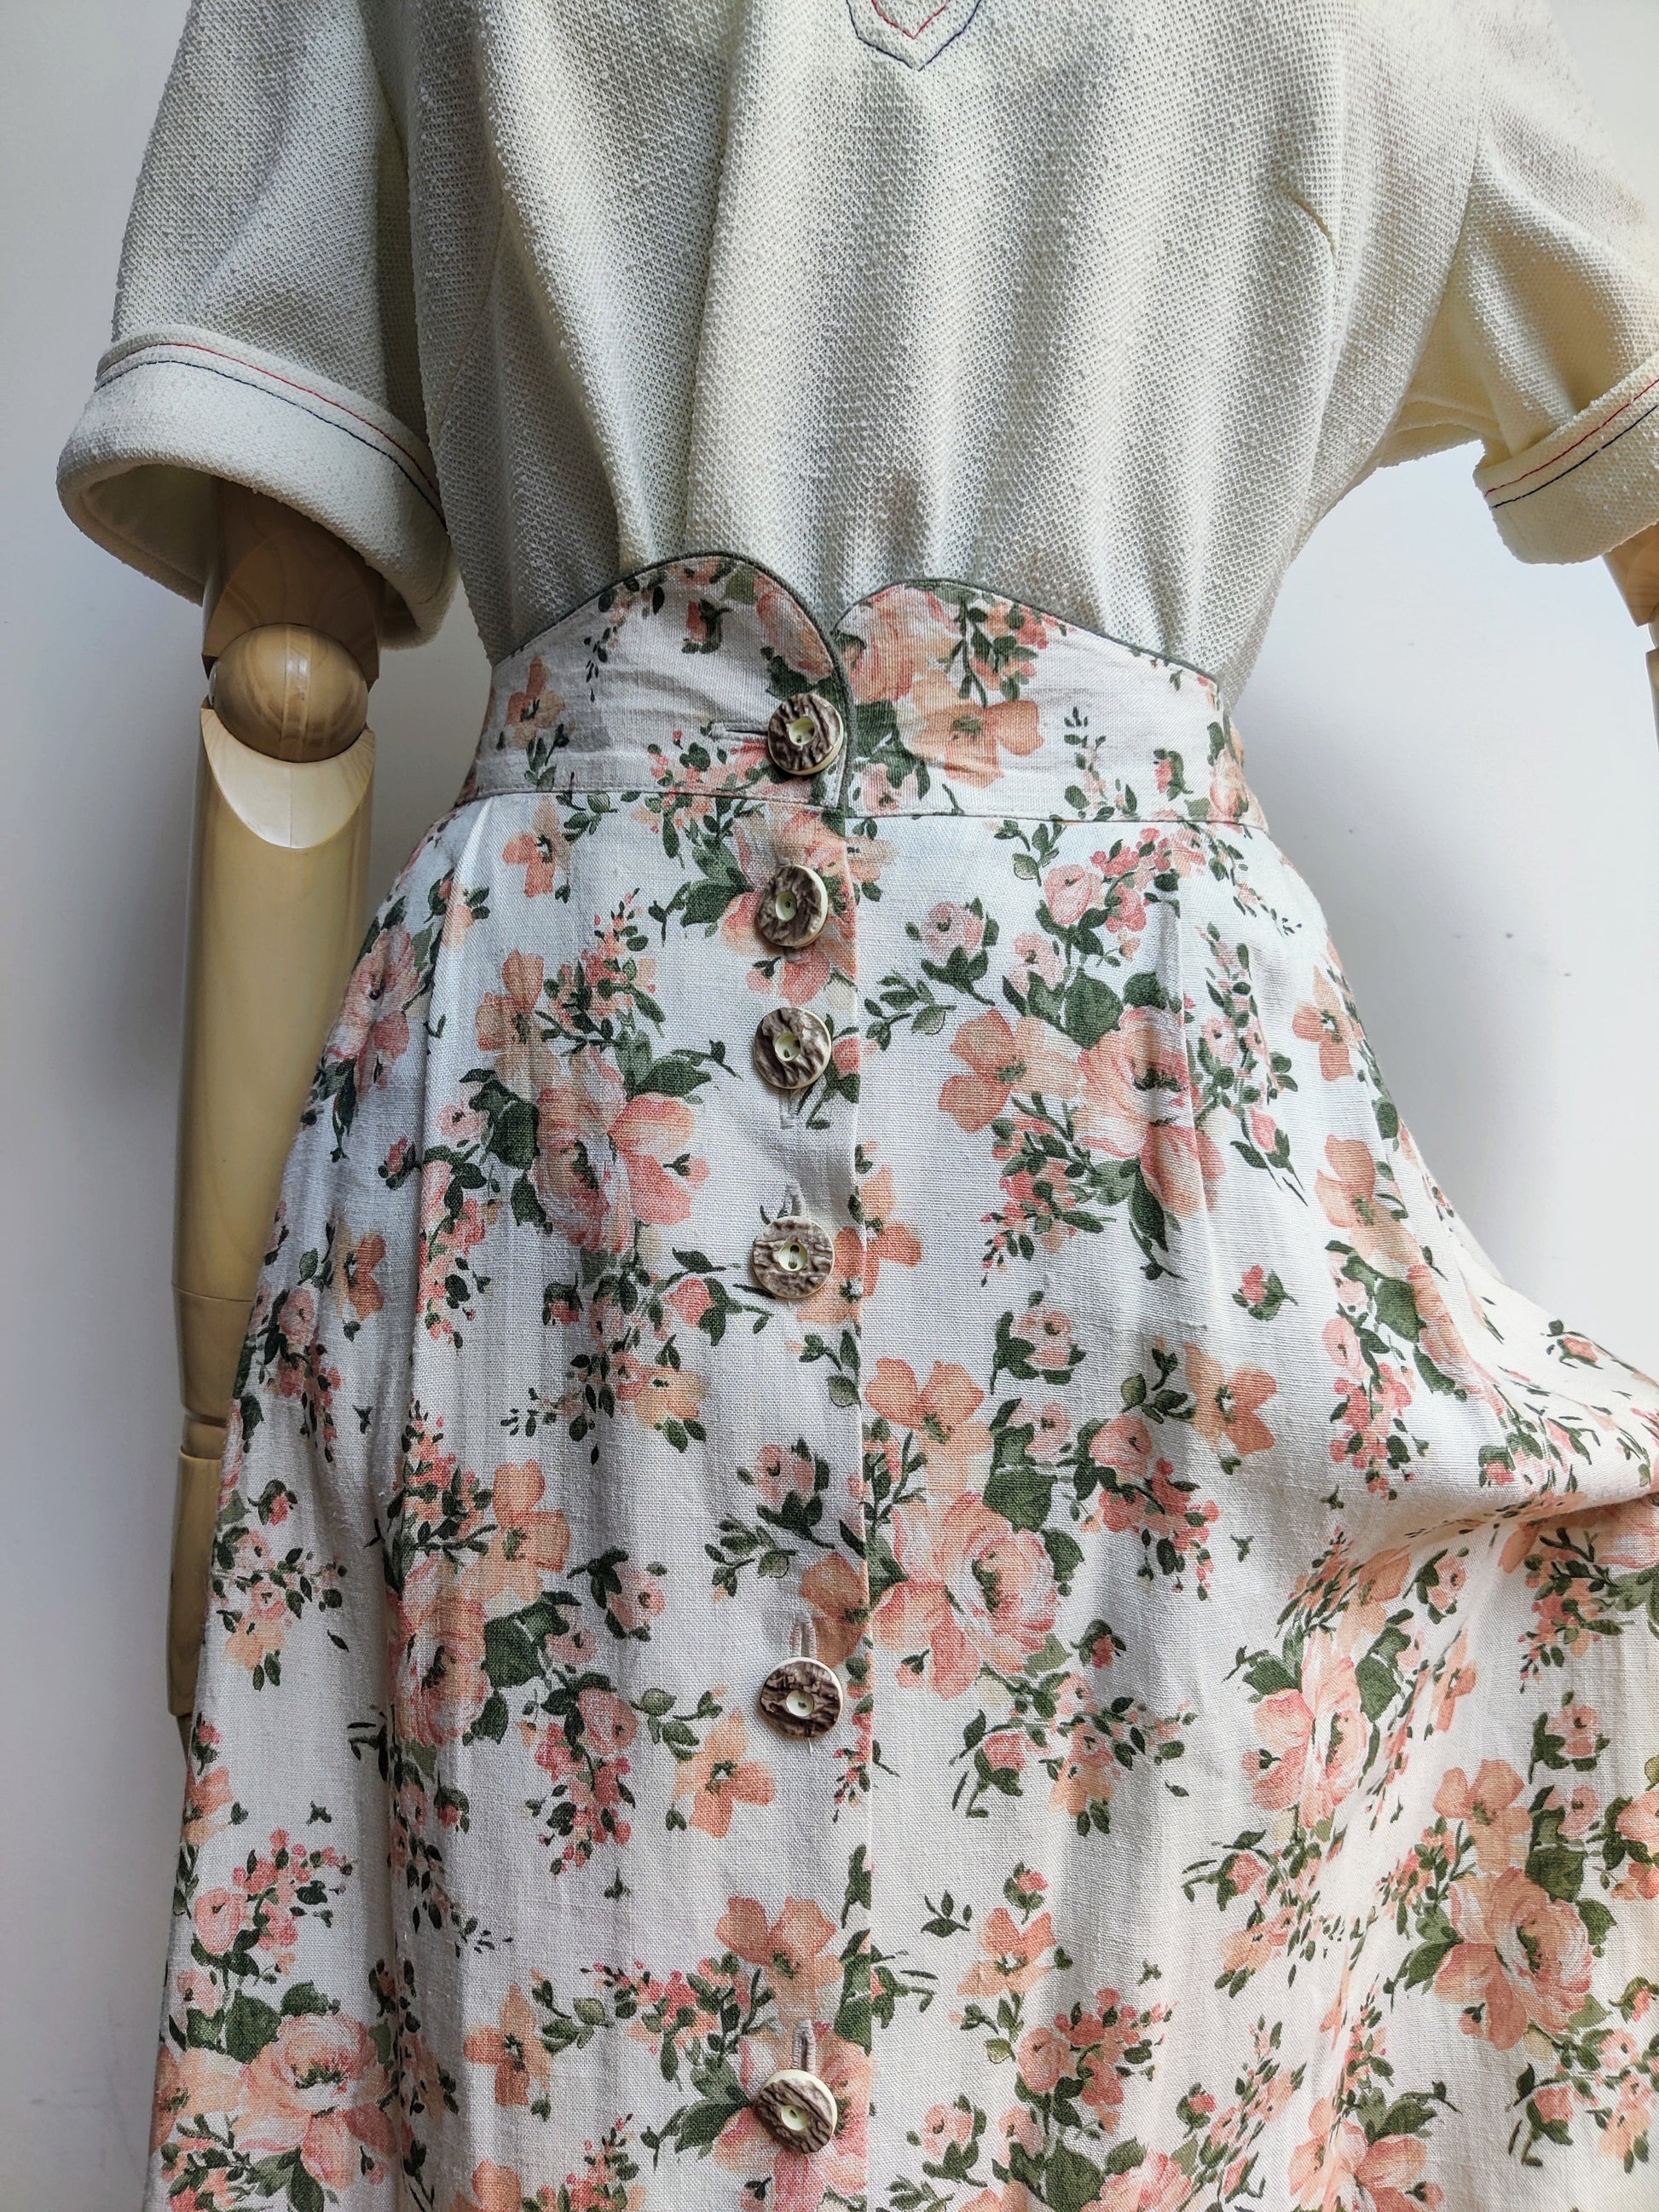 Gorgeous cream linen skirt with pink and green floral design